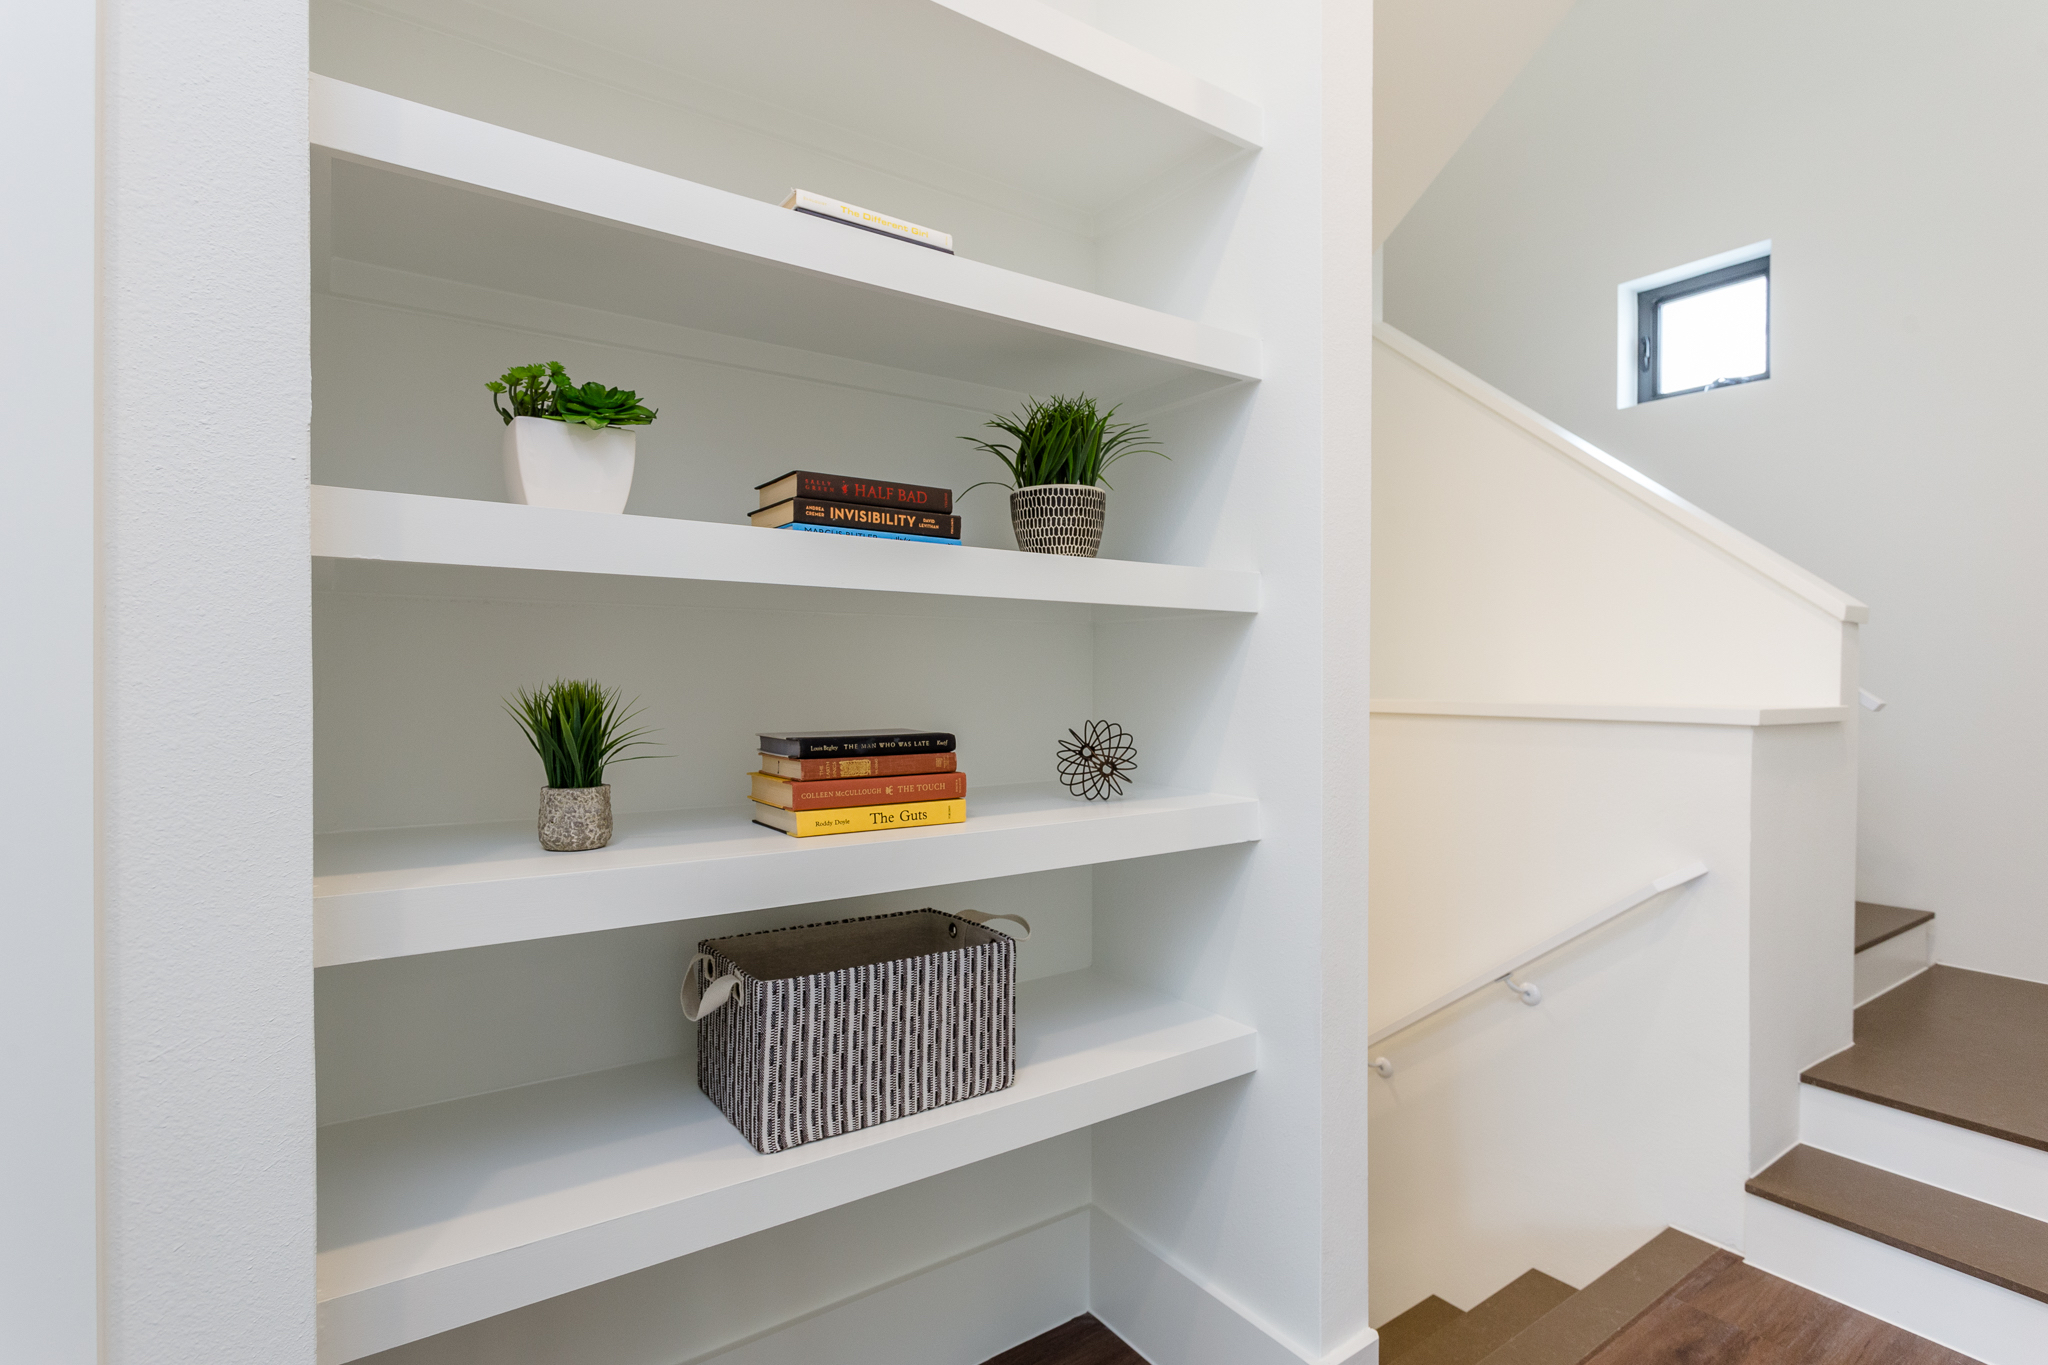  Just outside the bathroom, you'll find stylish shelving. 